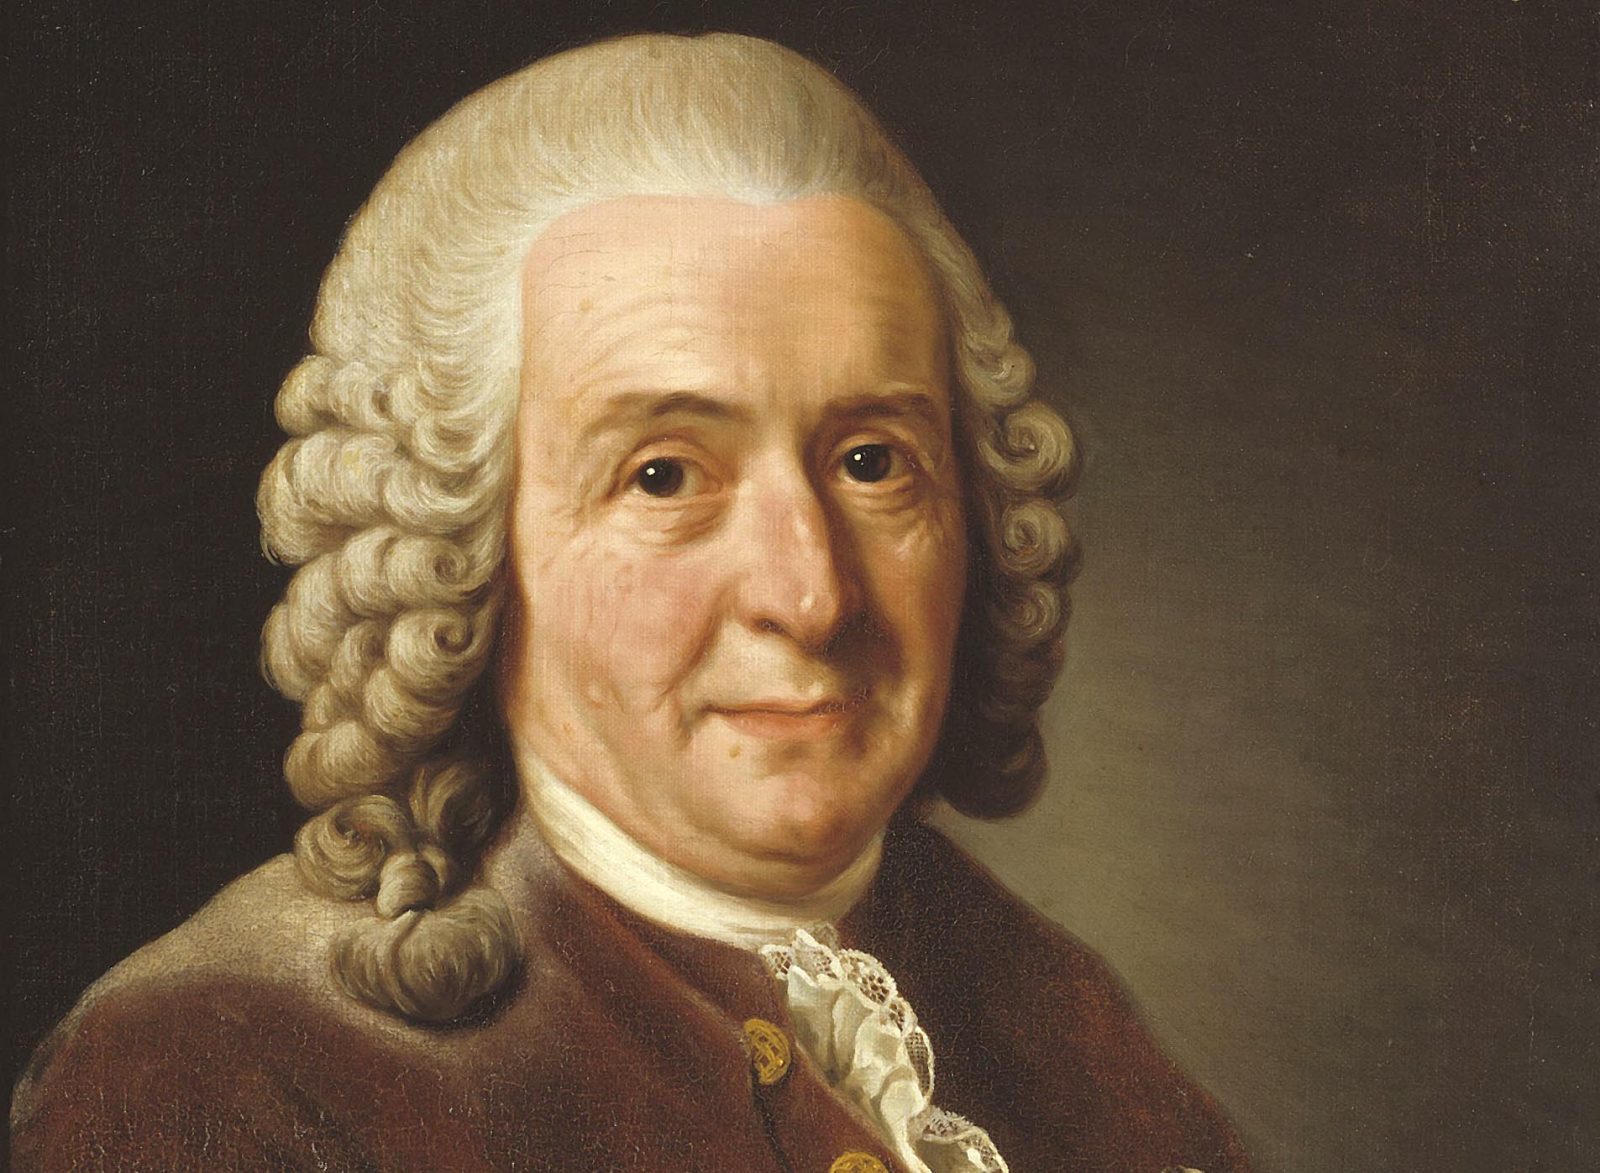 This Is Probably the Hardest Random Knowledge Quiz I’ve Ever Taken, But If You Think You Can Pass It, Be My Guest Carl Linnaeus or Carl von Linné